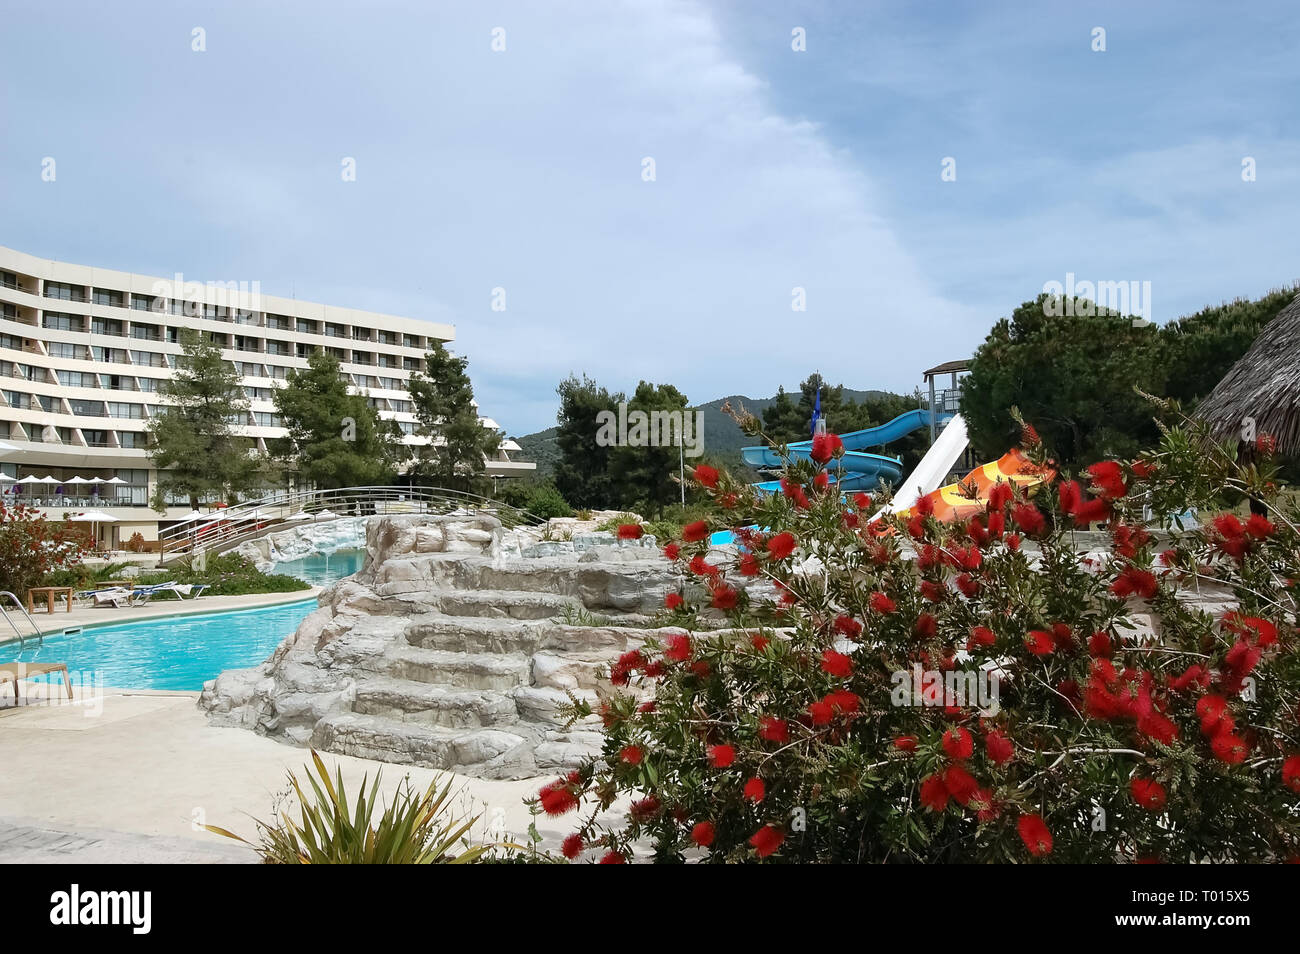 Neos Marmaras, Greece - May 07, 2012: View of the territory and swimming pool with water slides of a modern high-class hotel,  Sithoniа peninsula. Stock Photo